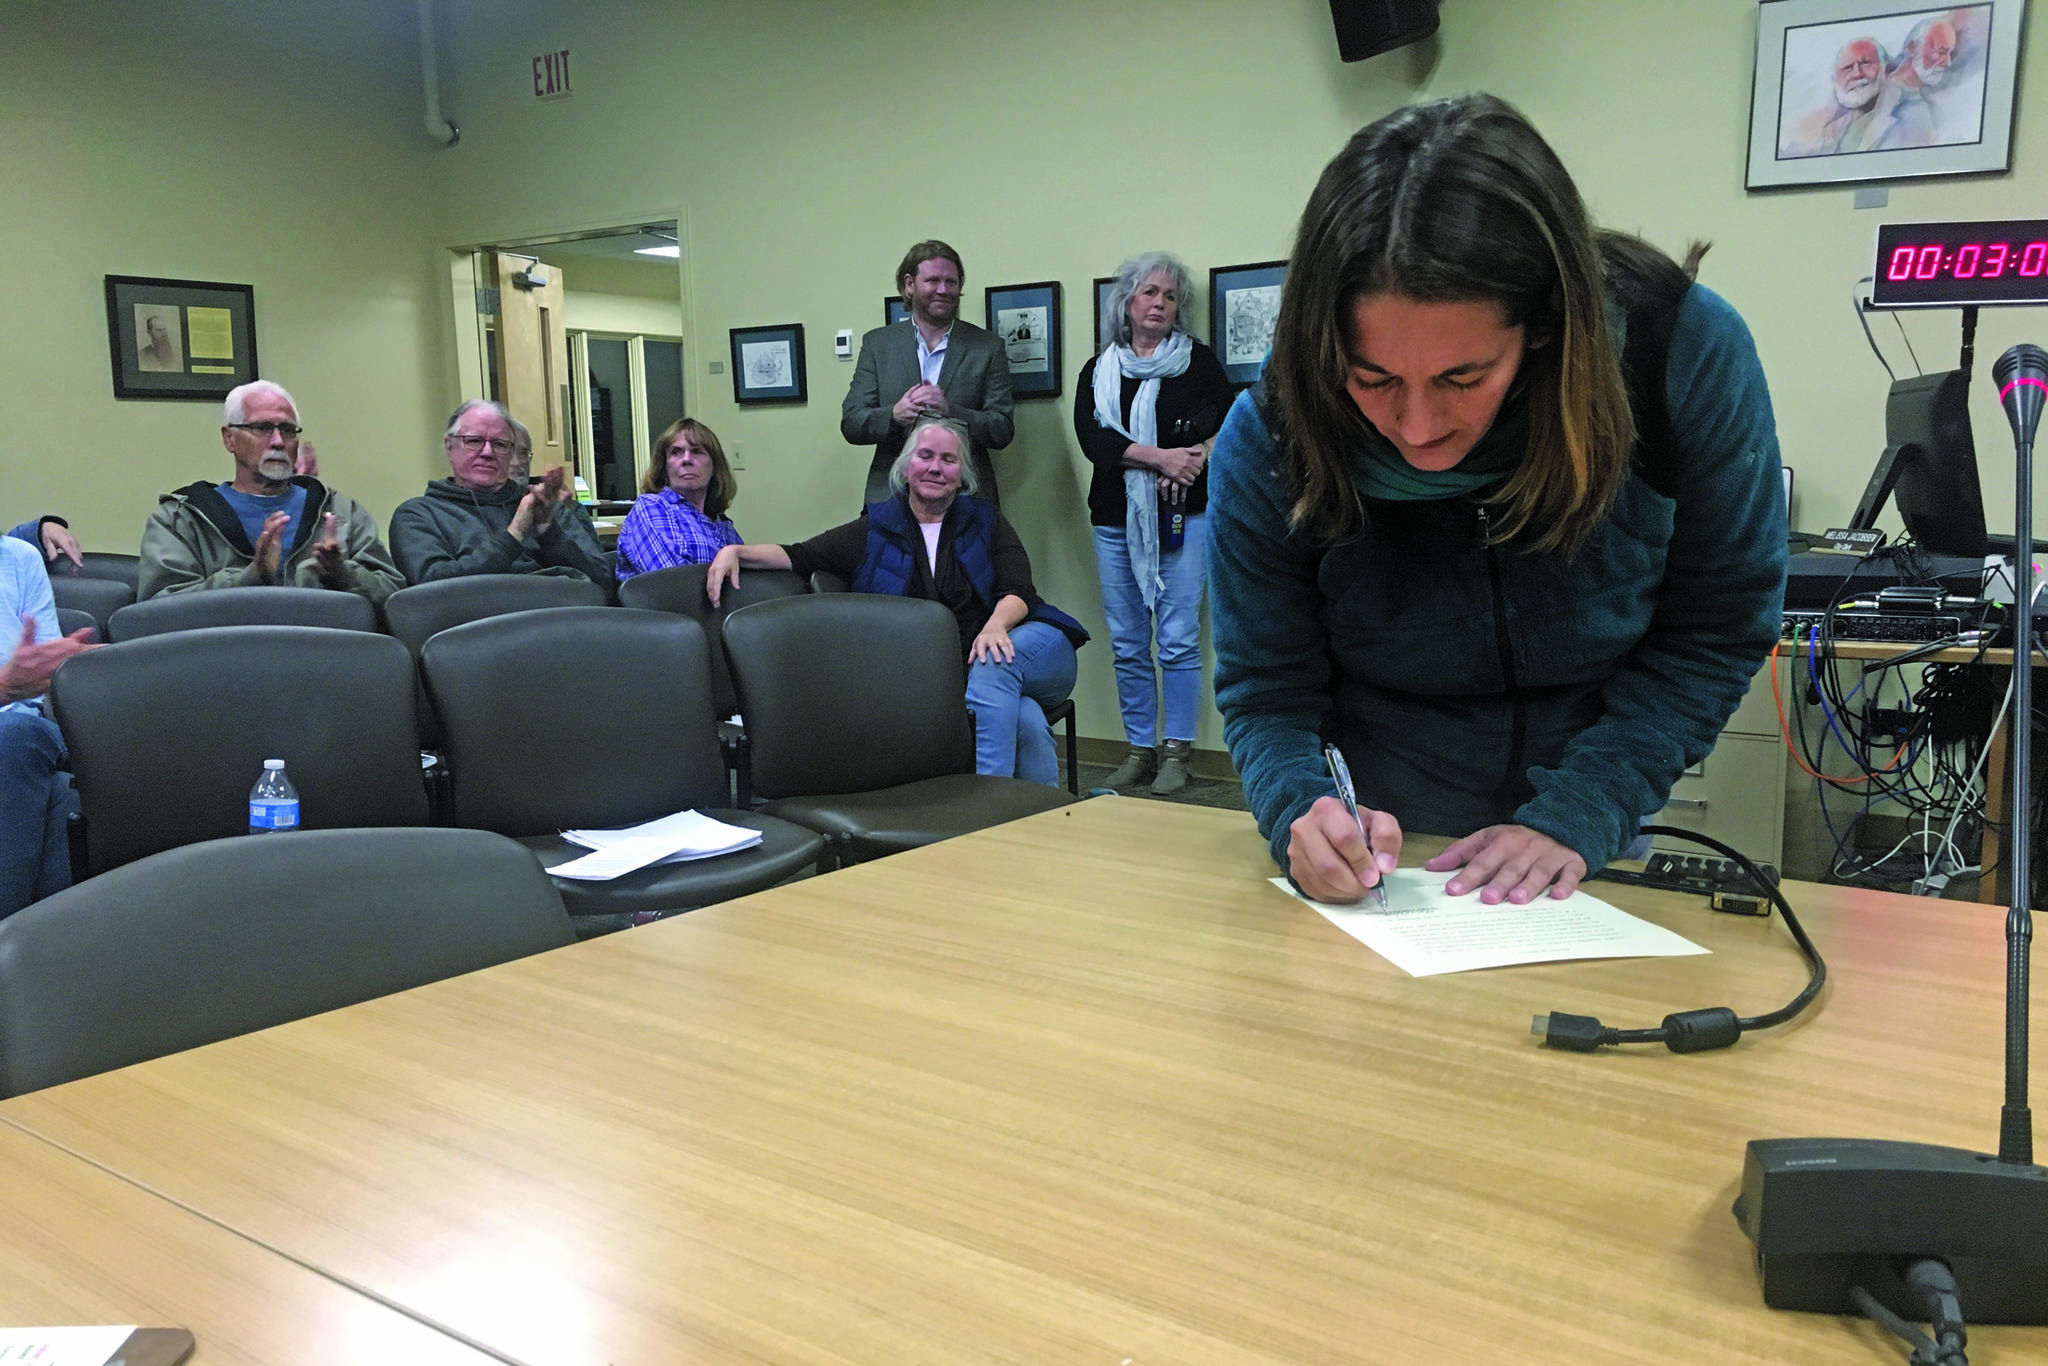 Storm Hansen-Cavasos is sworn in as a new member of the Homer City Council at a Monday, Oct. 14, 2019 council meeting at Homer City Hall in Homer, Alaska. (Photo by Megan Pacer/Homer News)